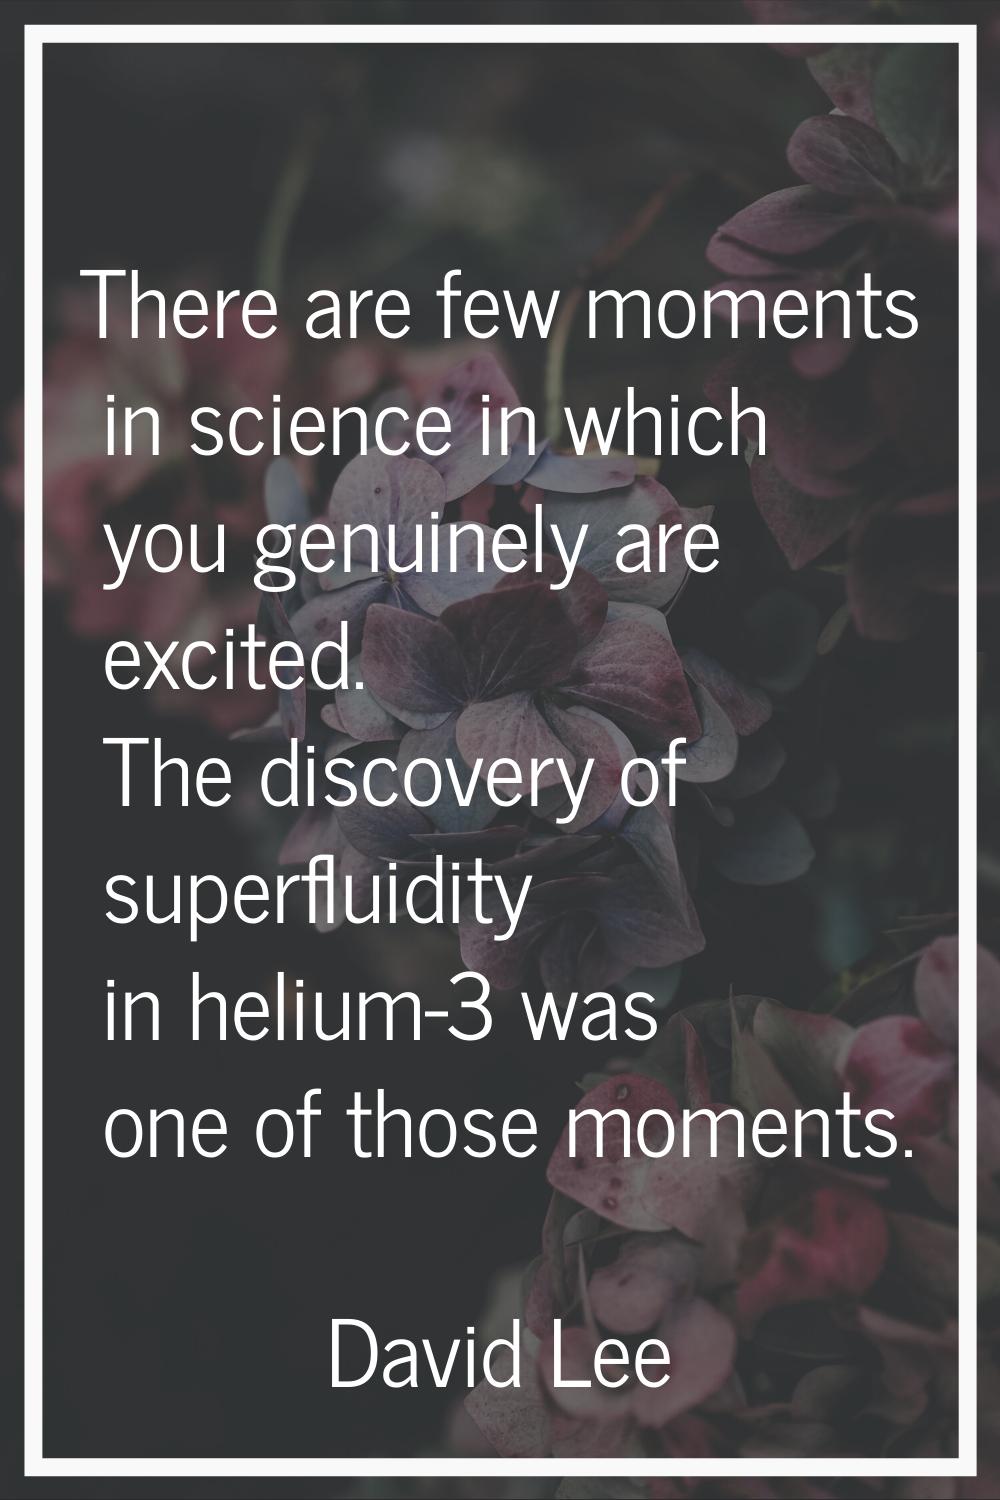 There are few moments in science in which you genuinely are excited. The discovery of superfluidity